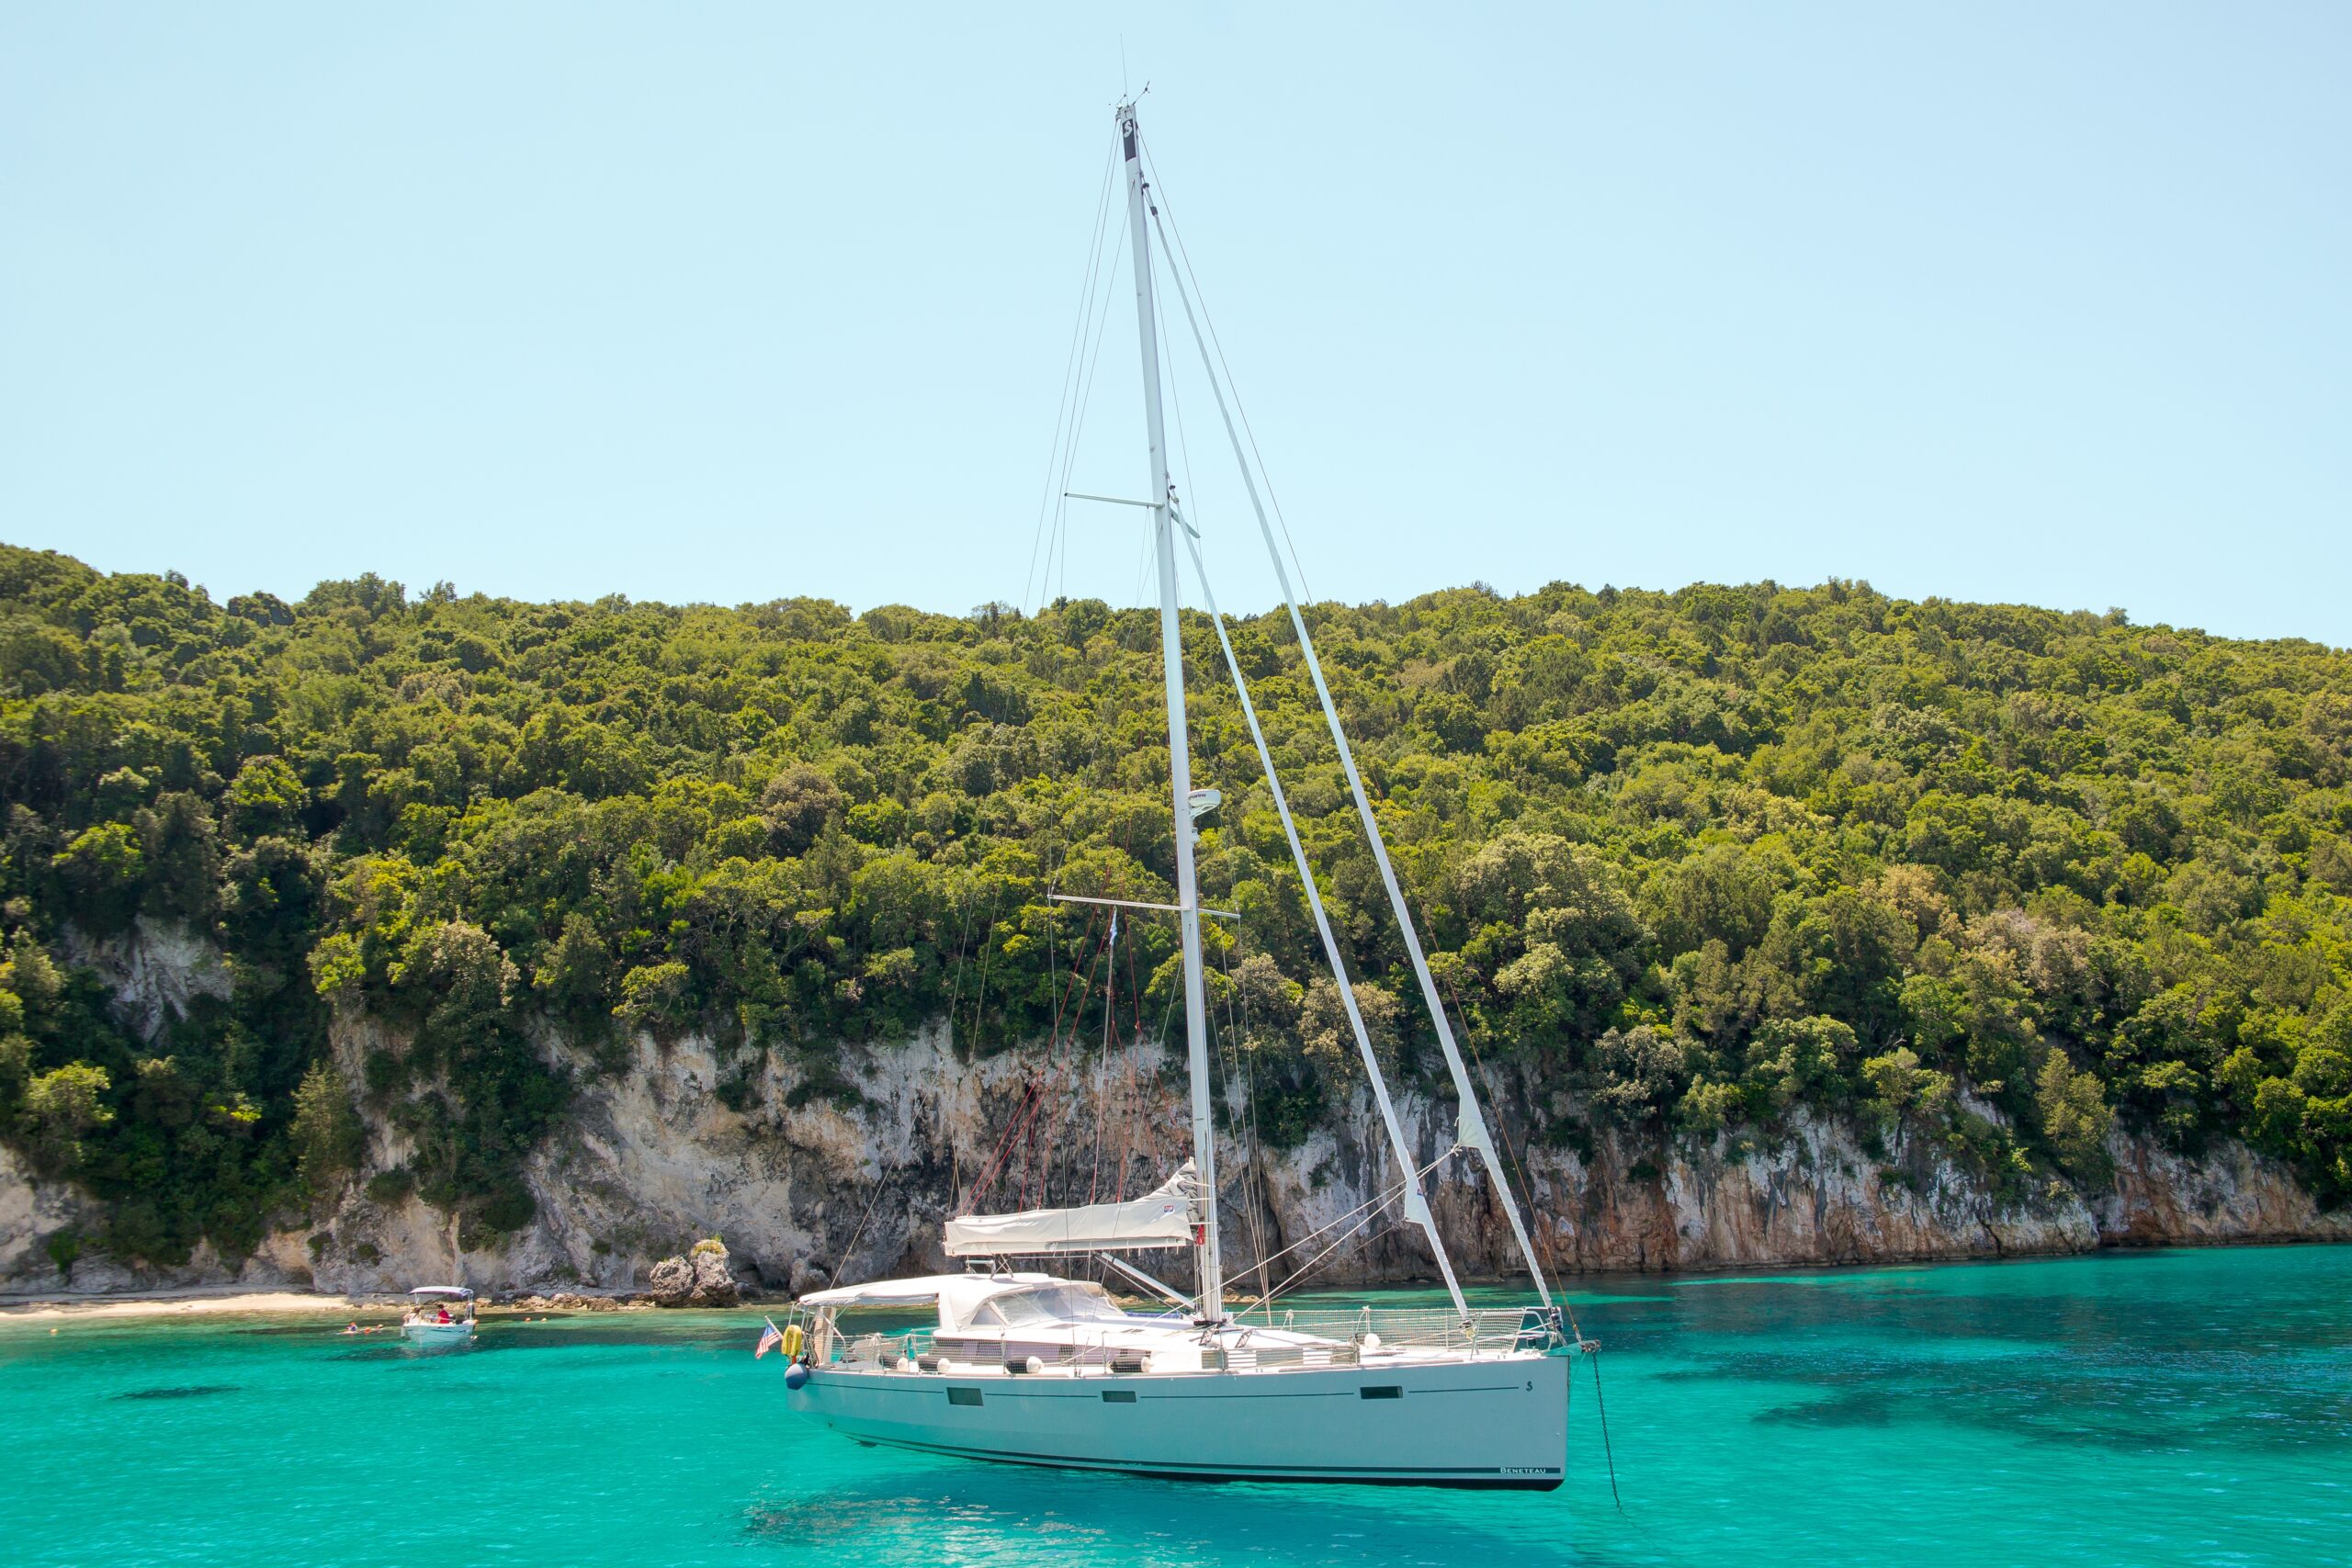 A white yacht sailing in the turquoise lagoon on a sunny day